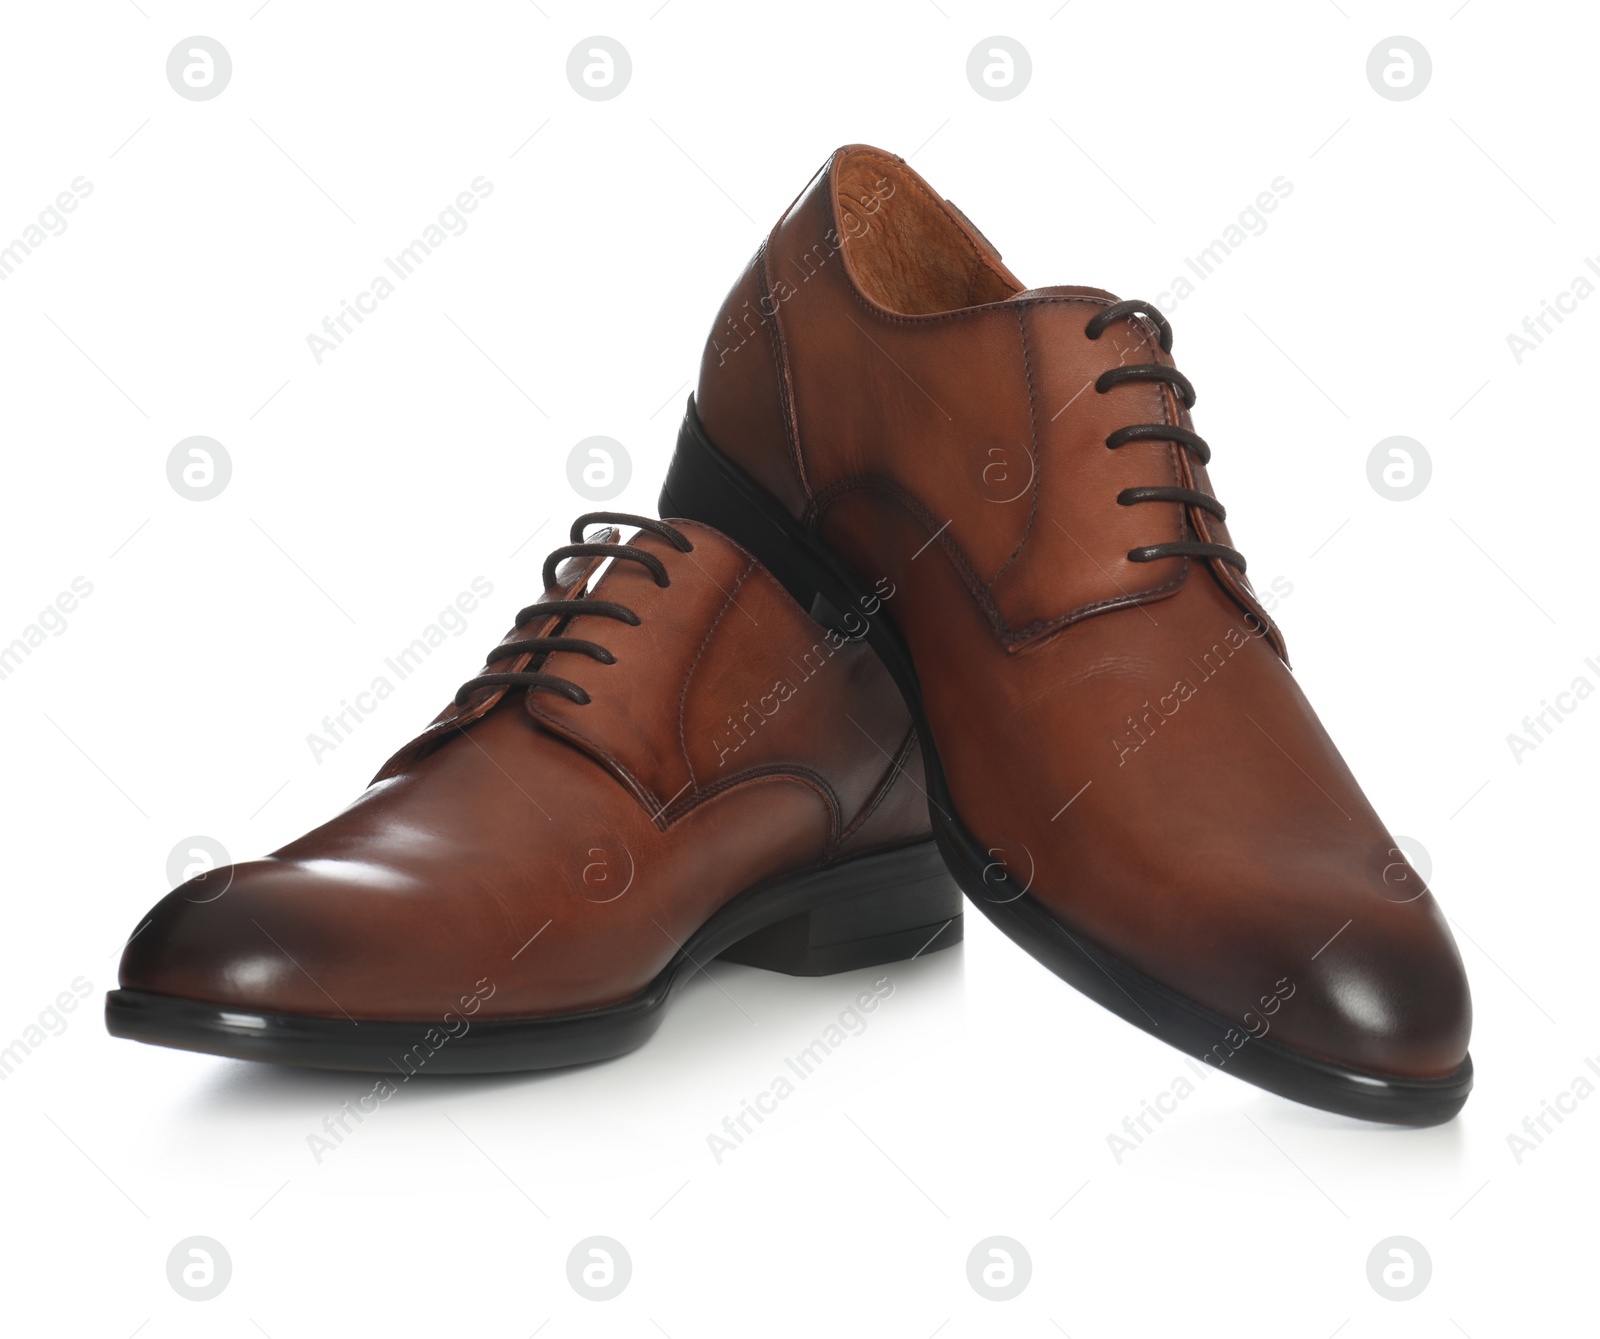 Photo of Classic wedding shoes for groom on white background